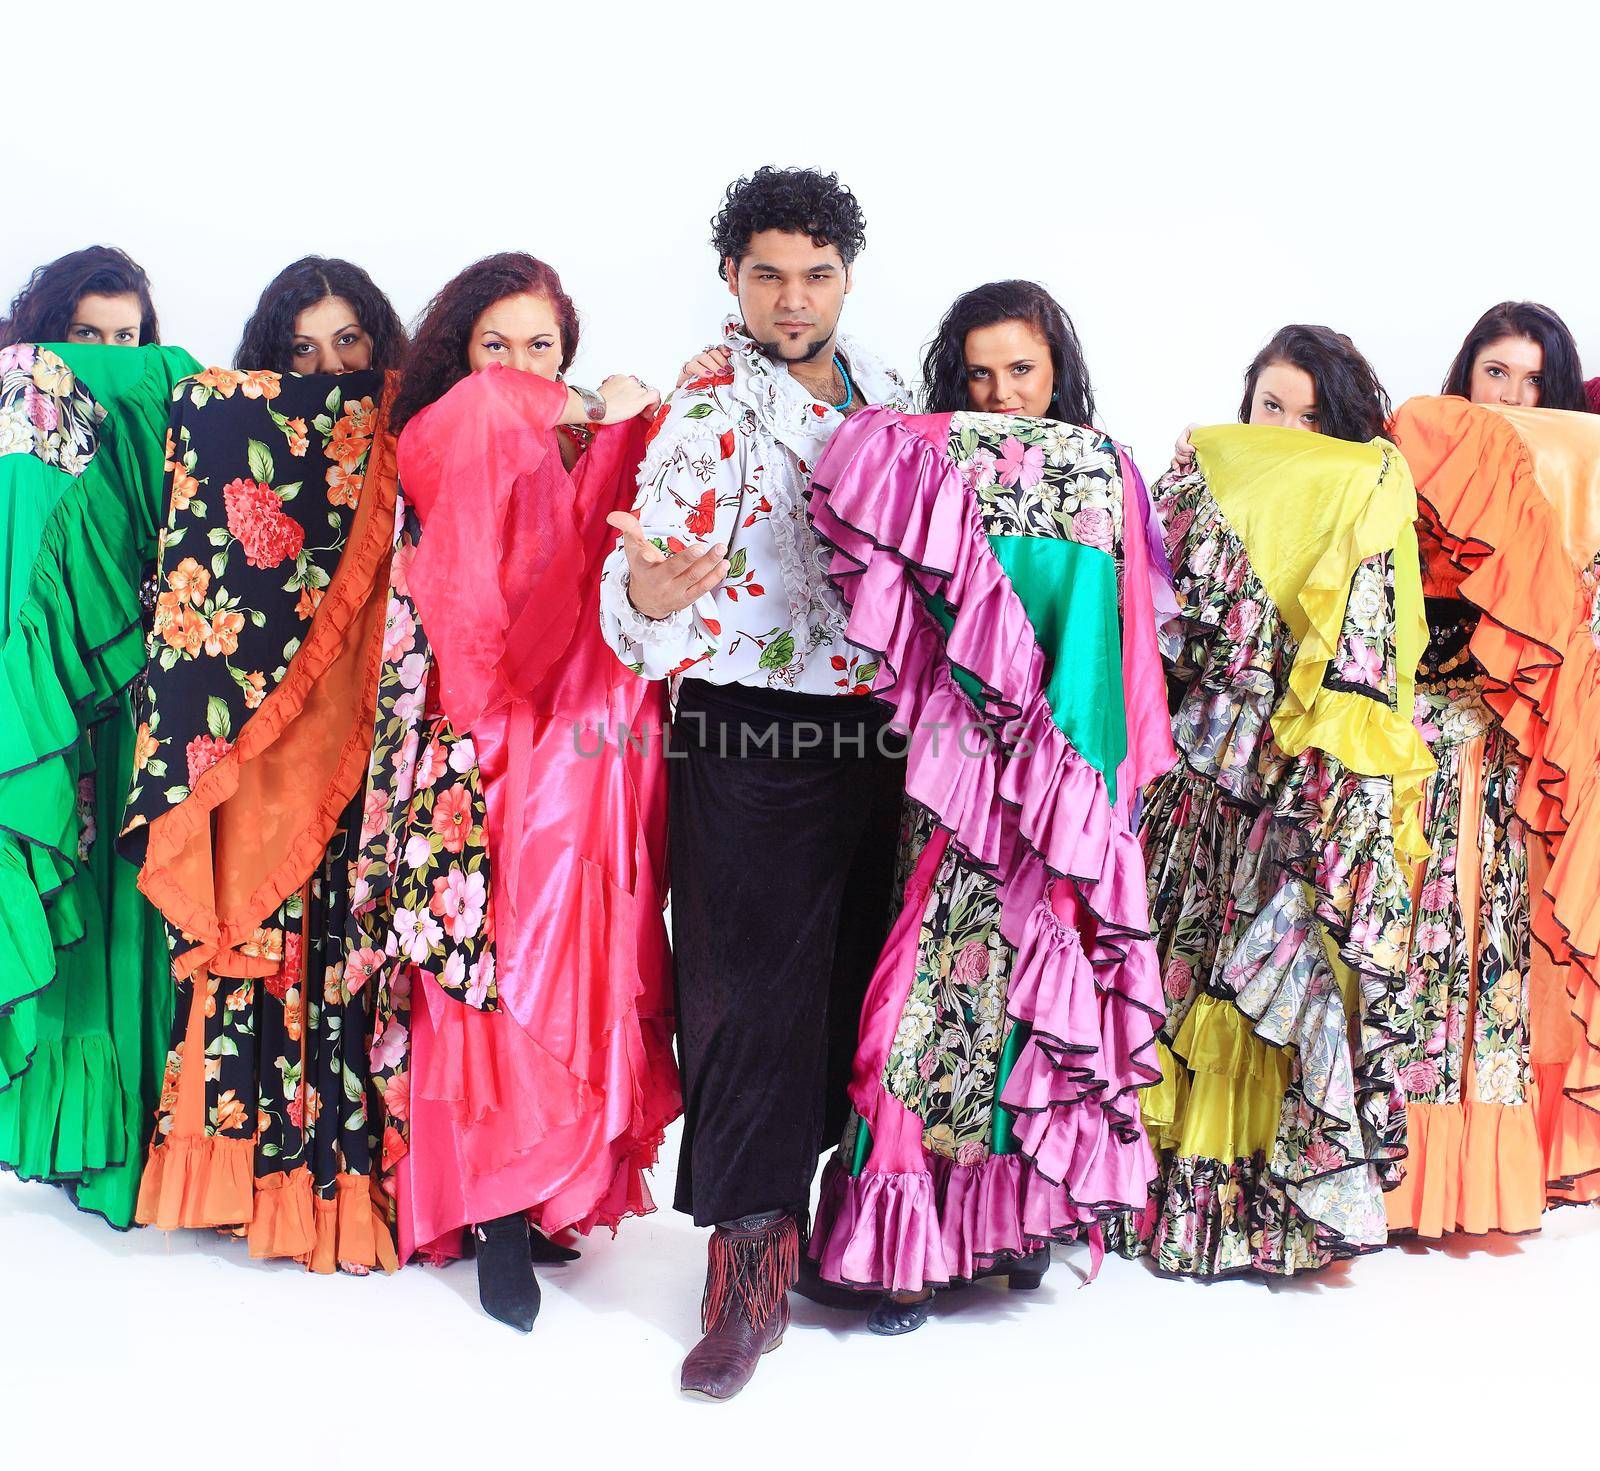 group portrait of a Gypsy dance group in national costumes by SmartPhotoLab